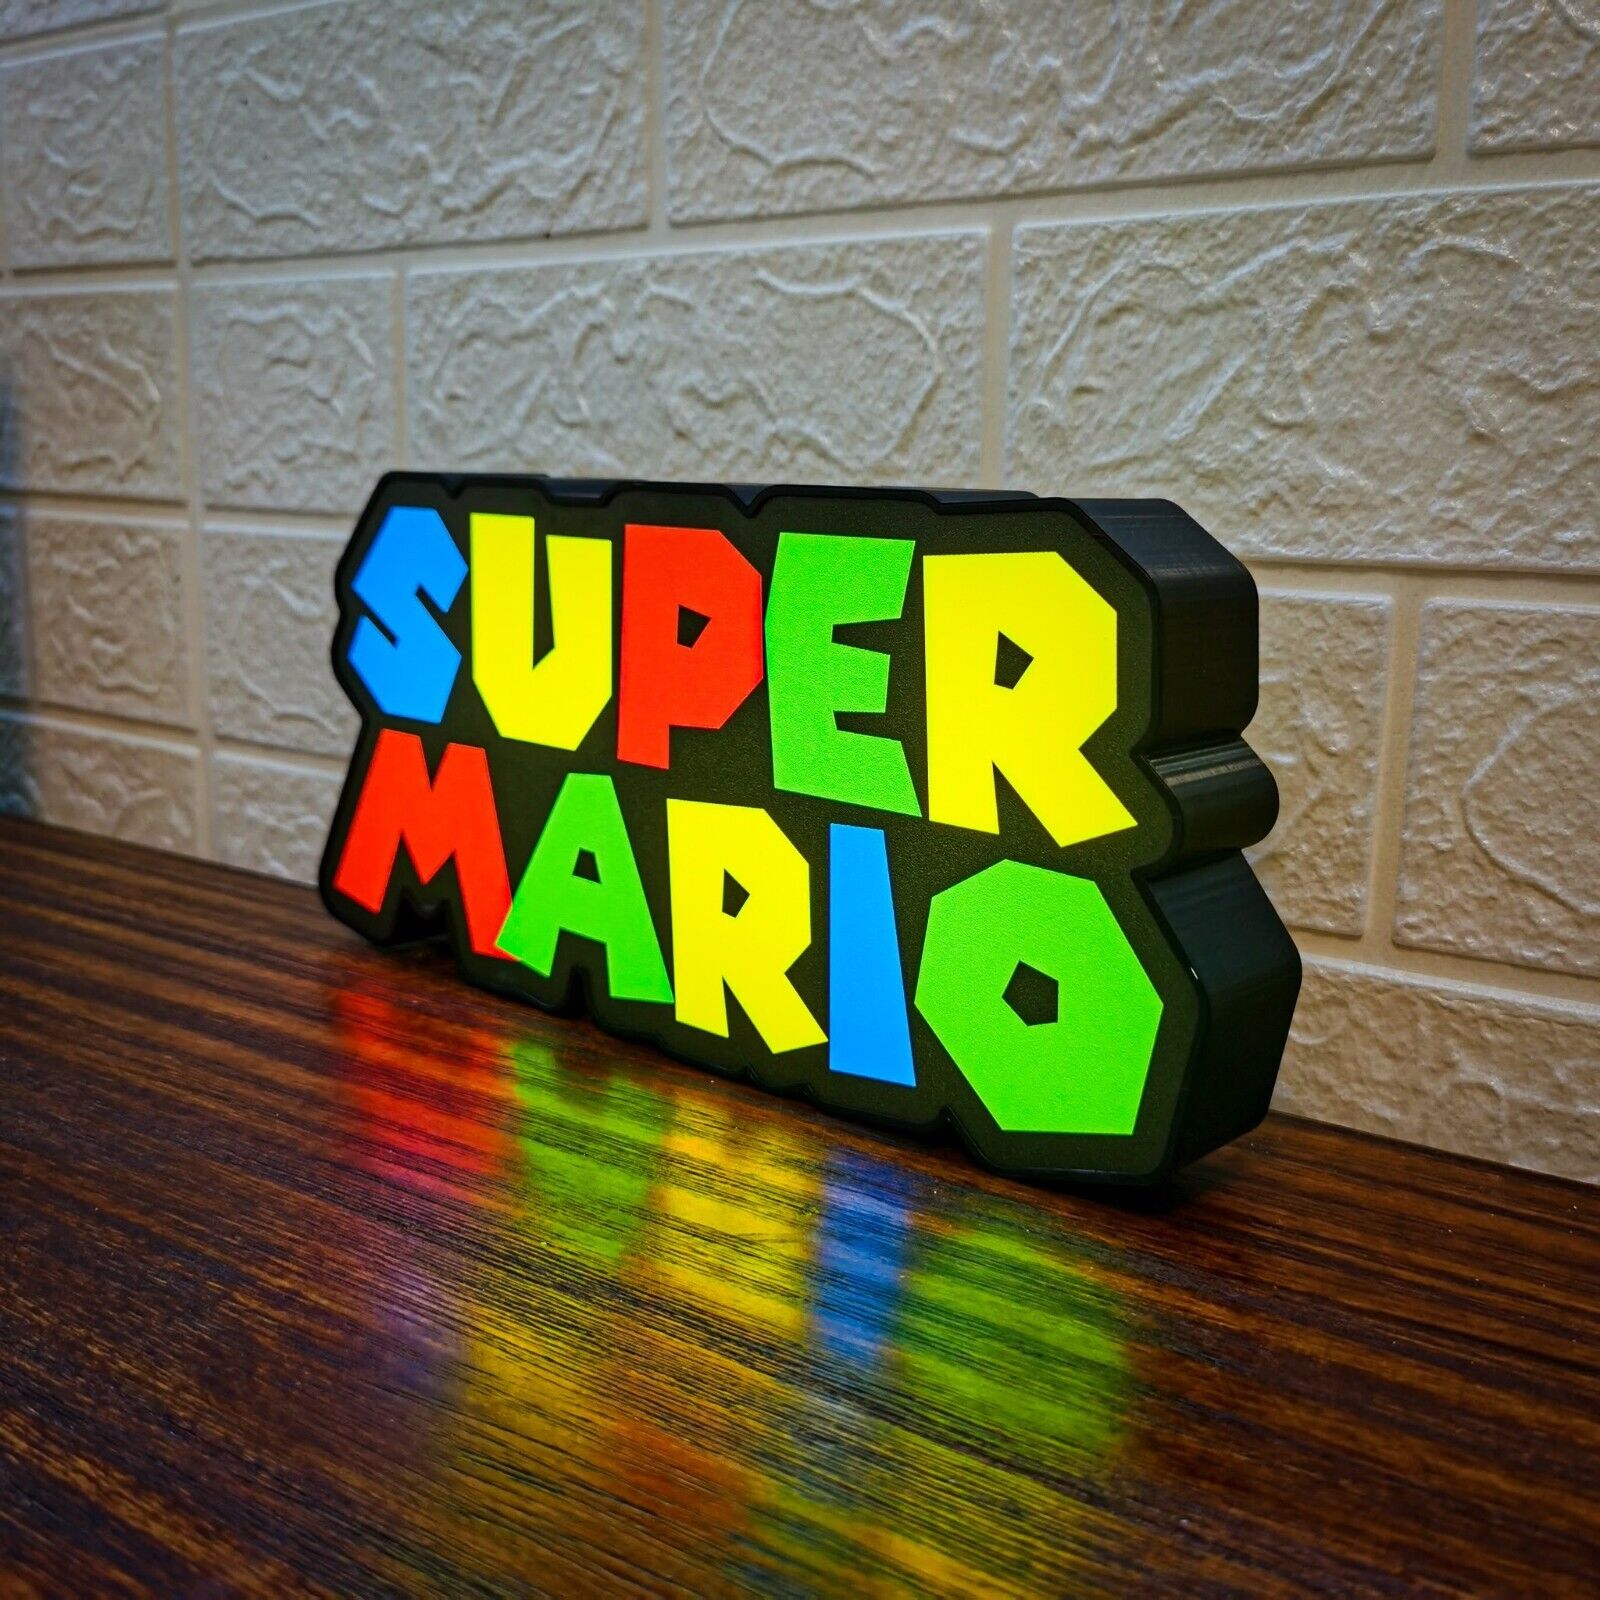 SNES Video Game Light Great for Gaming Room Decor Nintendo Sign for Man Cave Lights - FYLZGO Signs